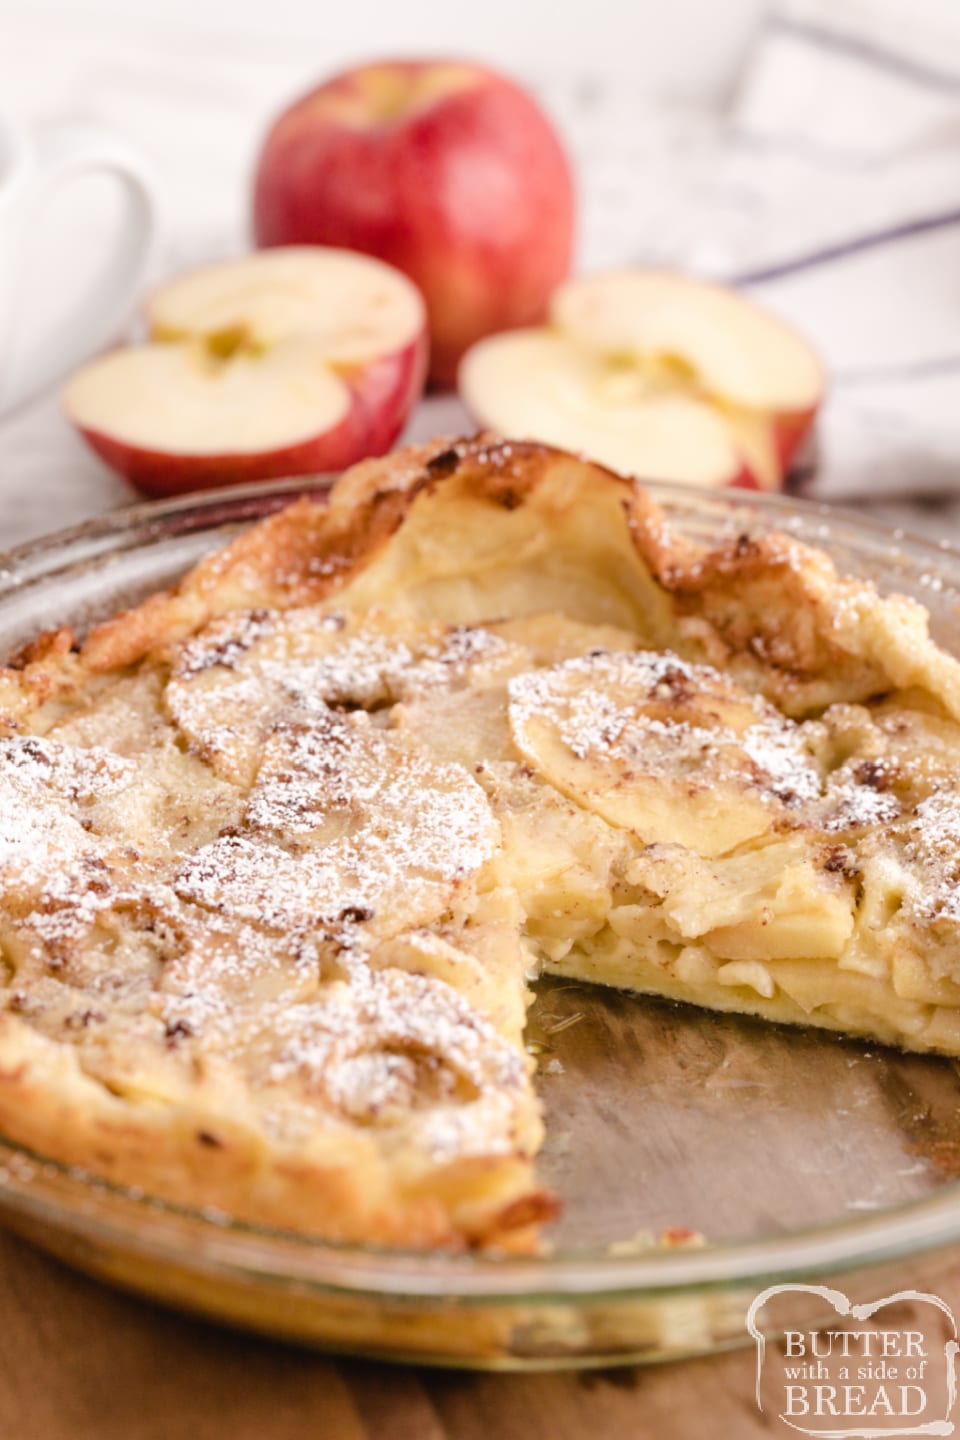 Apple German Pancake, also known as a Dutch Baby Pancake, made with flour, milk, eggs and fresh apples. The apples add so much flavor to this classic German pancake recipe!